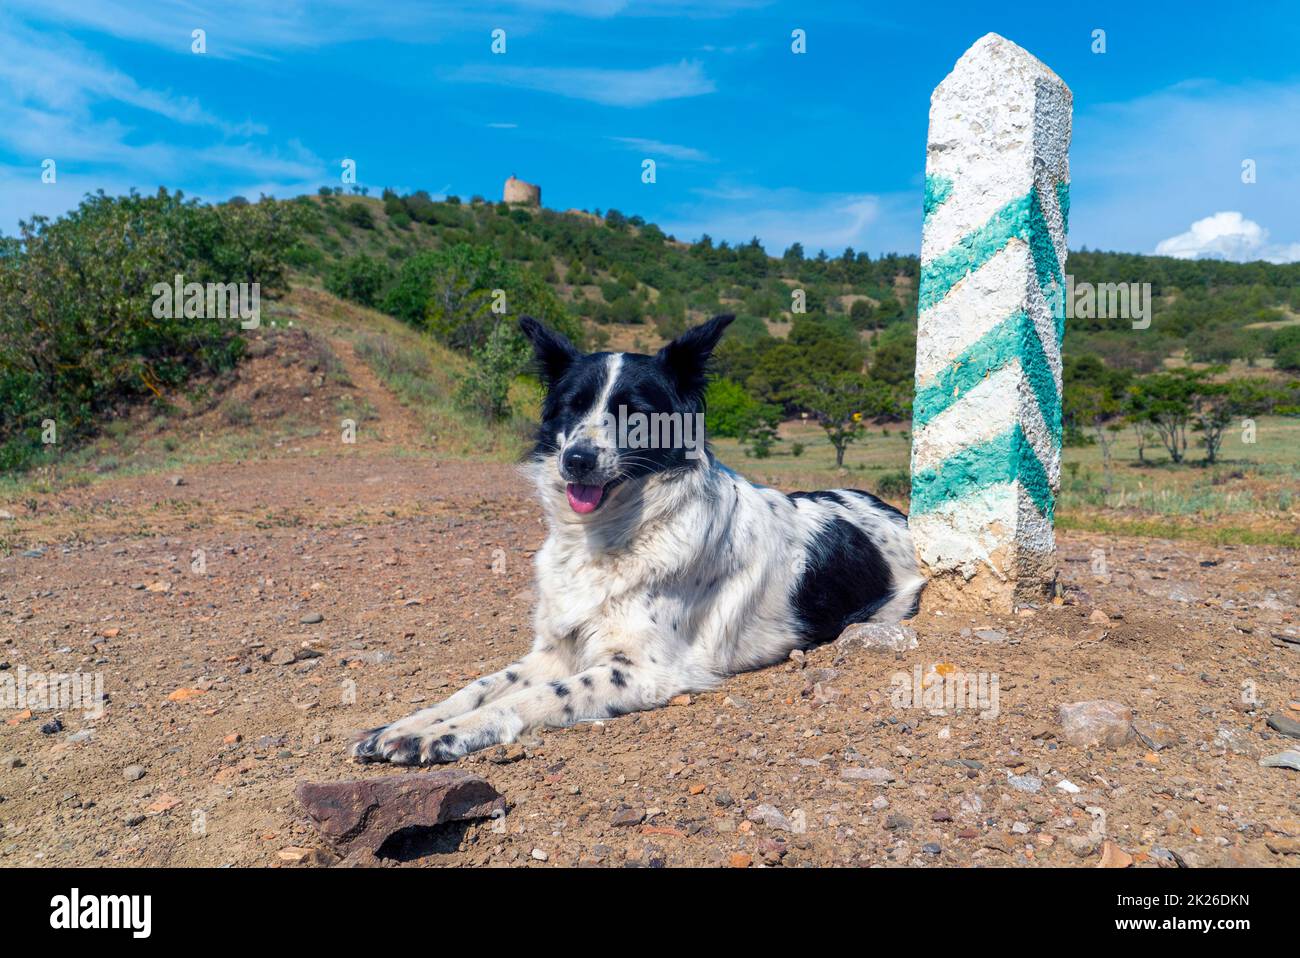 A border collie dog is lying near a post with green stripes. Stock Photo